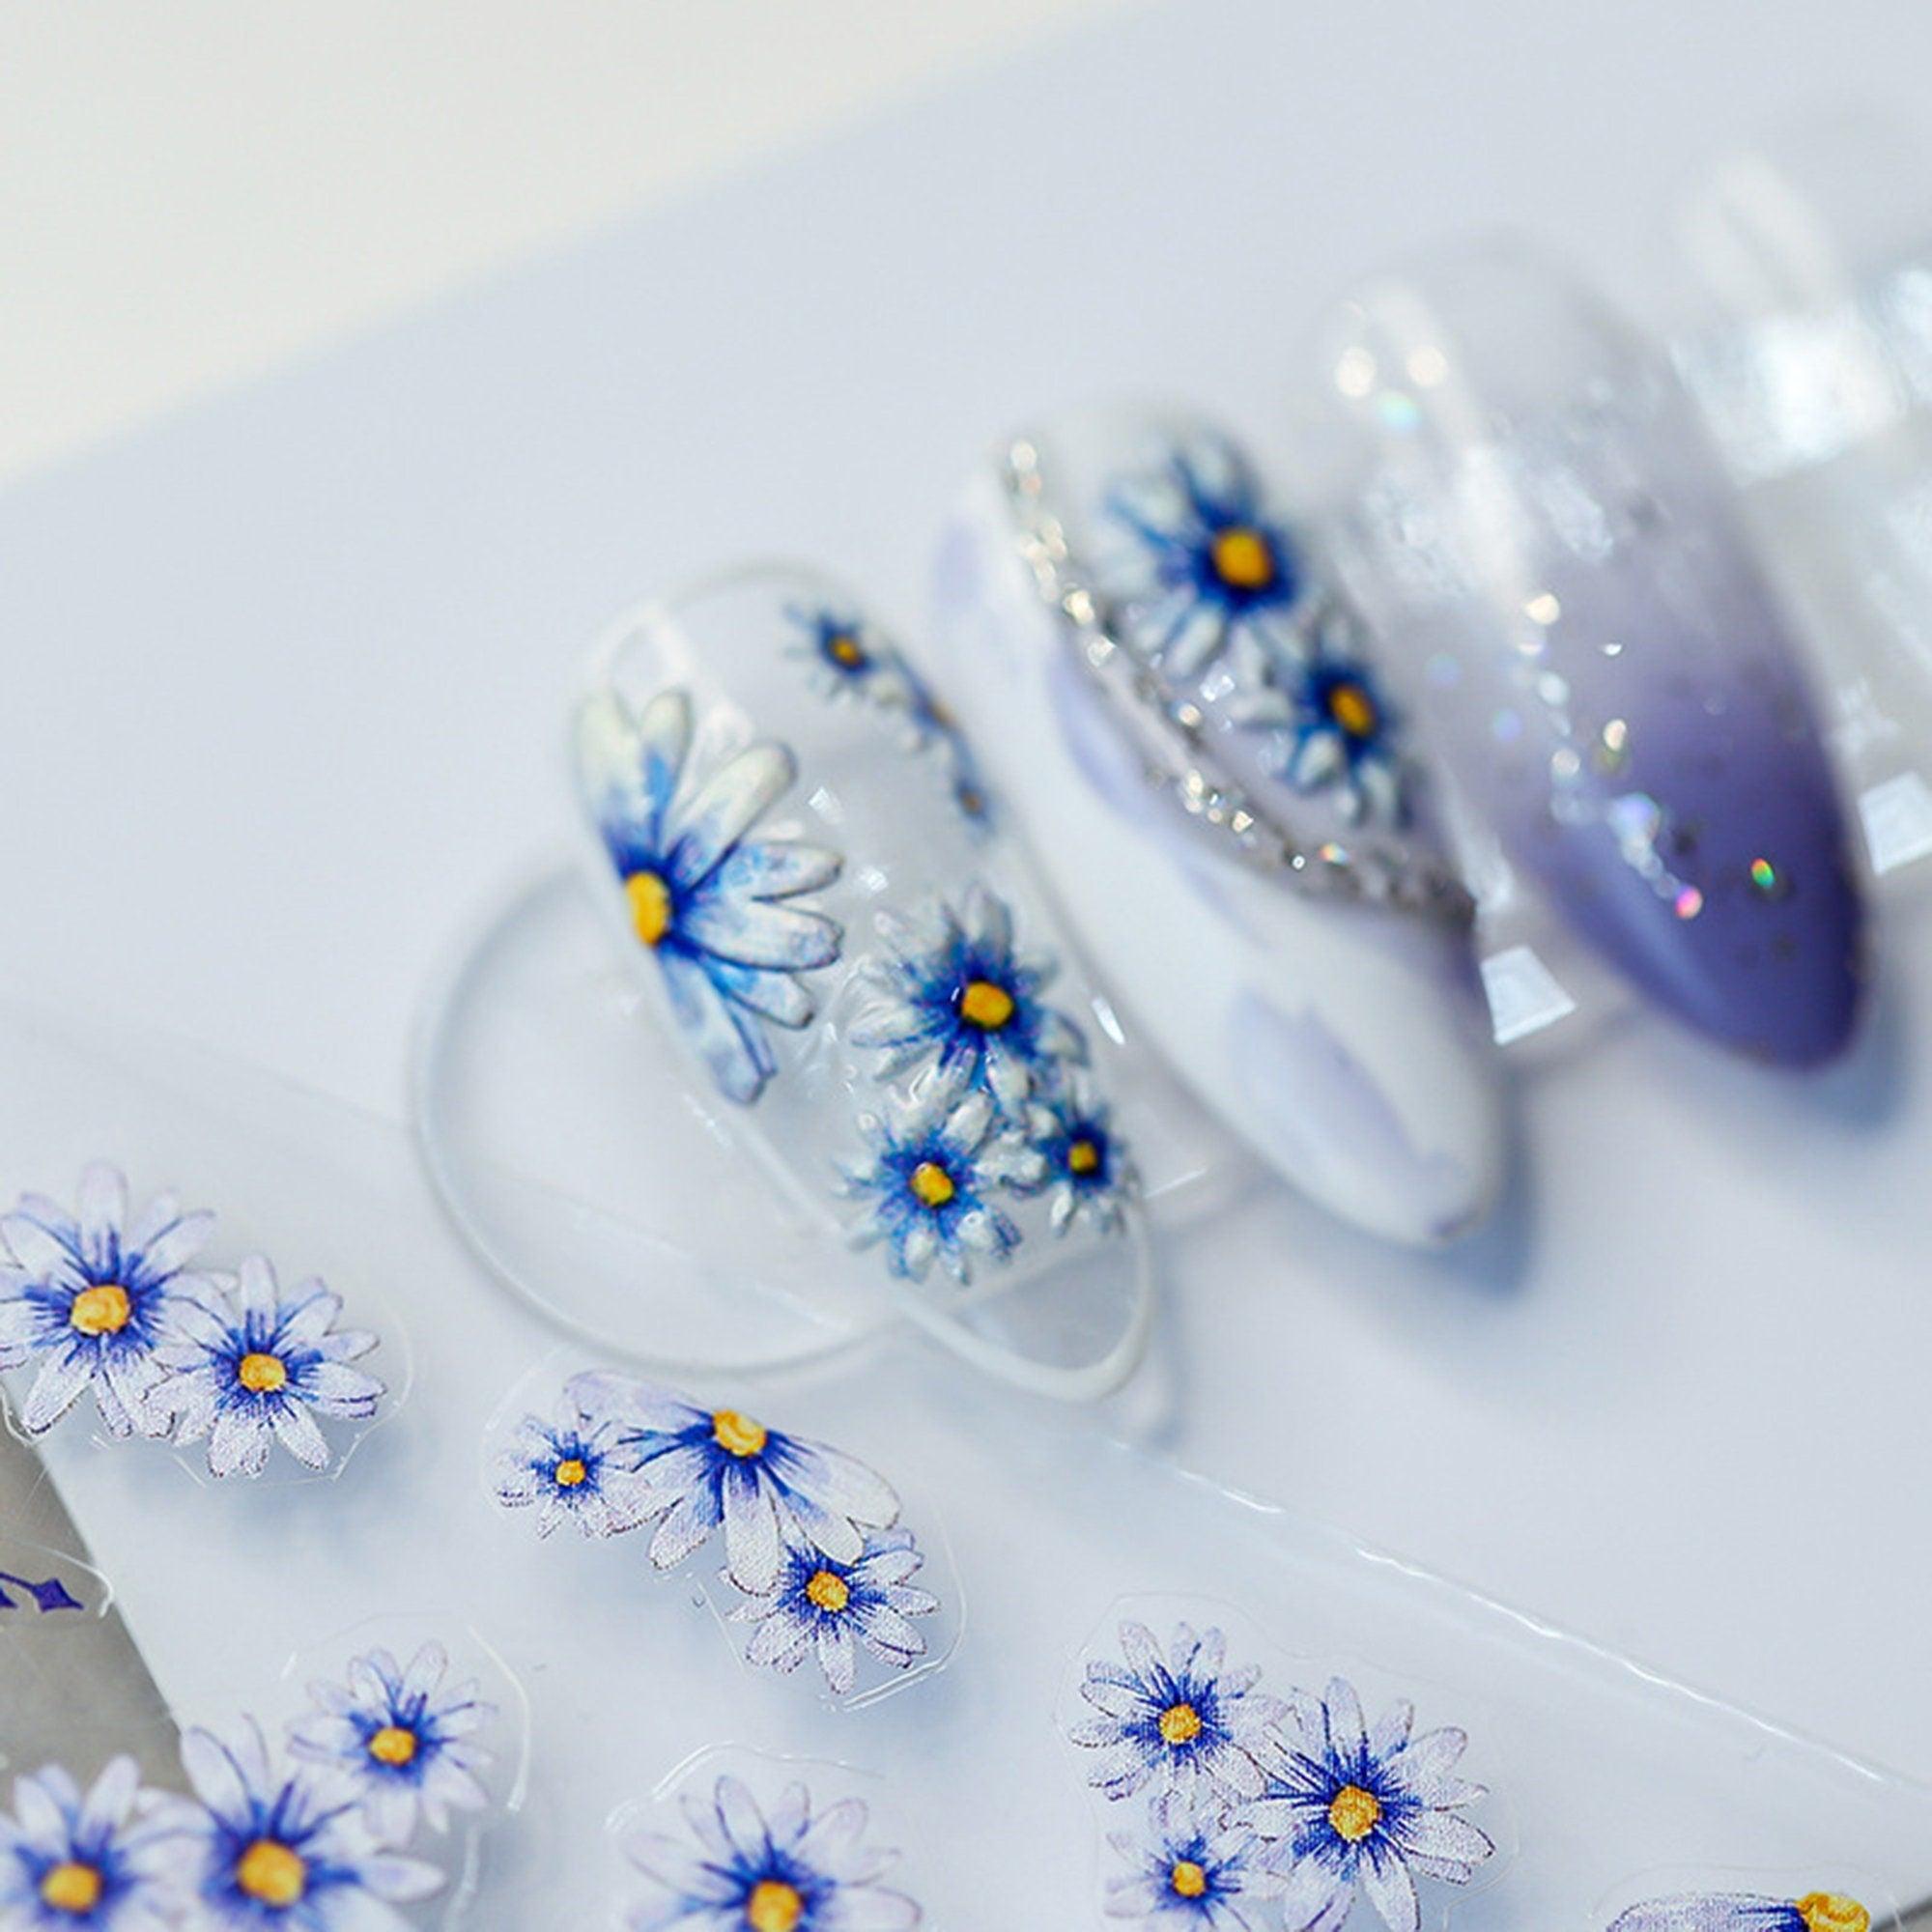 Flower Nail Decals, Dainty Flower Nail Stickers, Blue Flower Nail Stickers, 3D Nails, 5D Nails, DIY Nails - Miss Fairy Nails